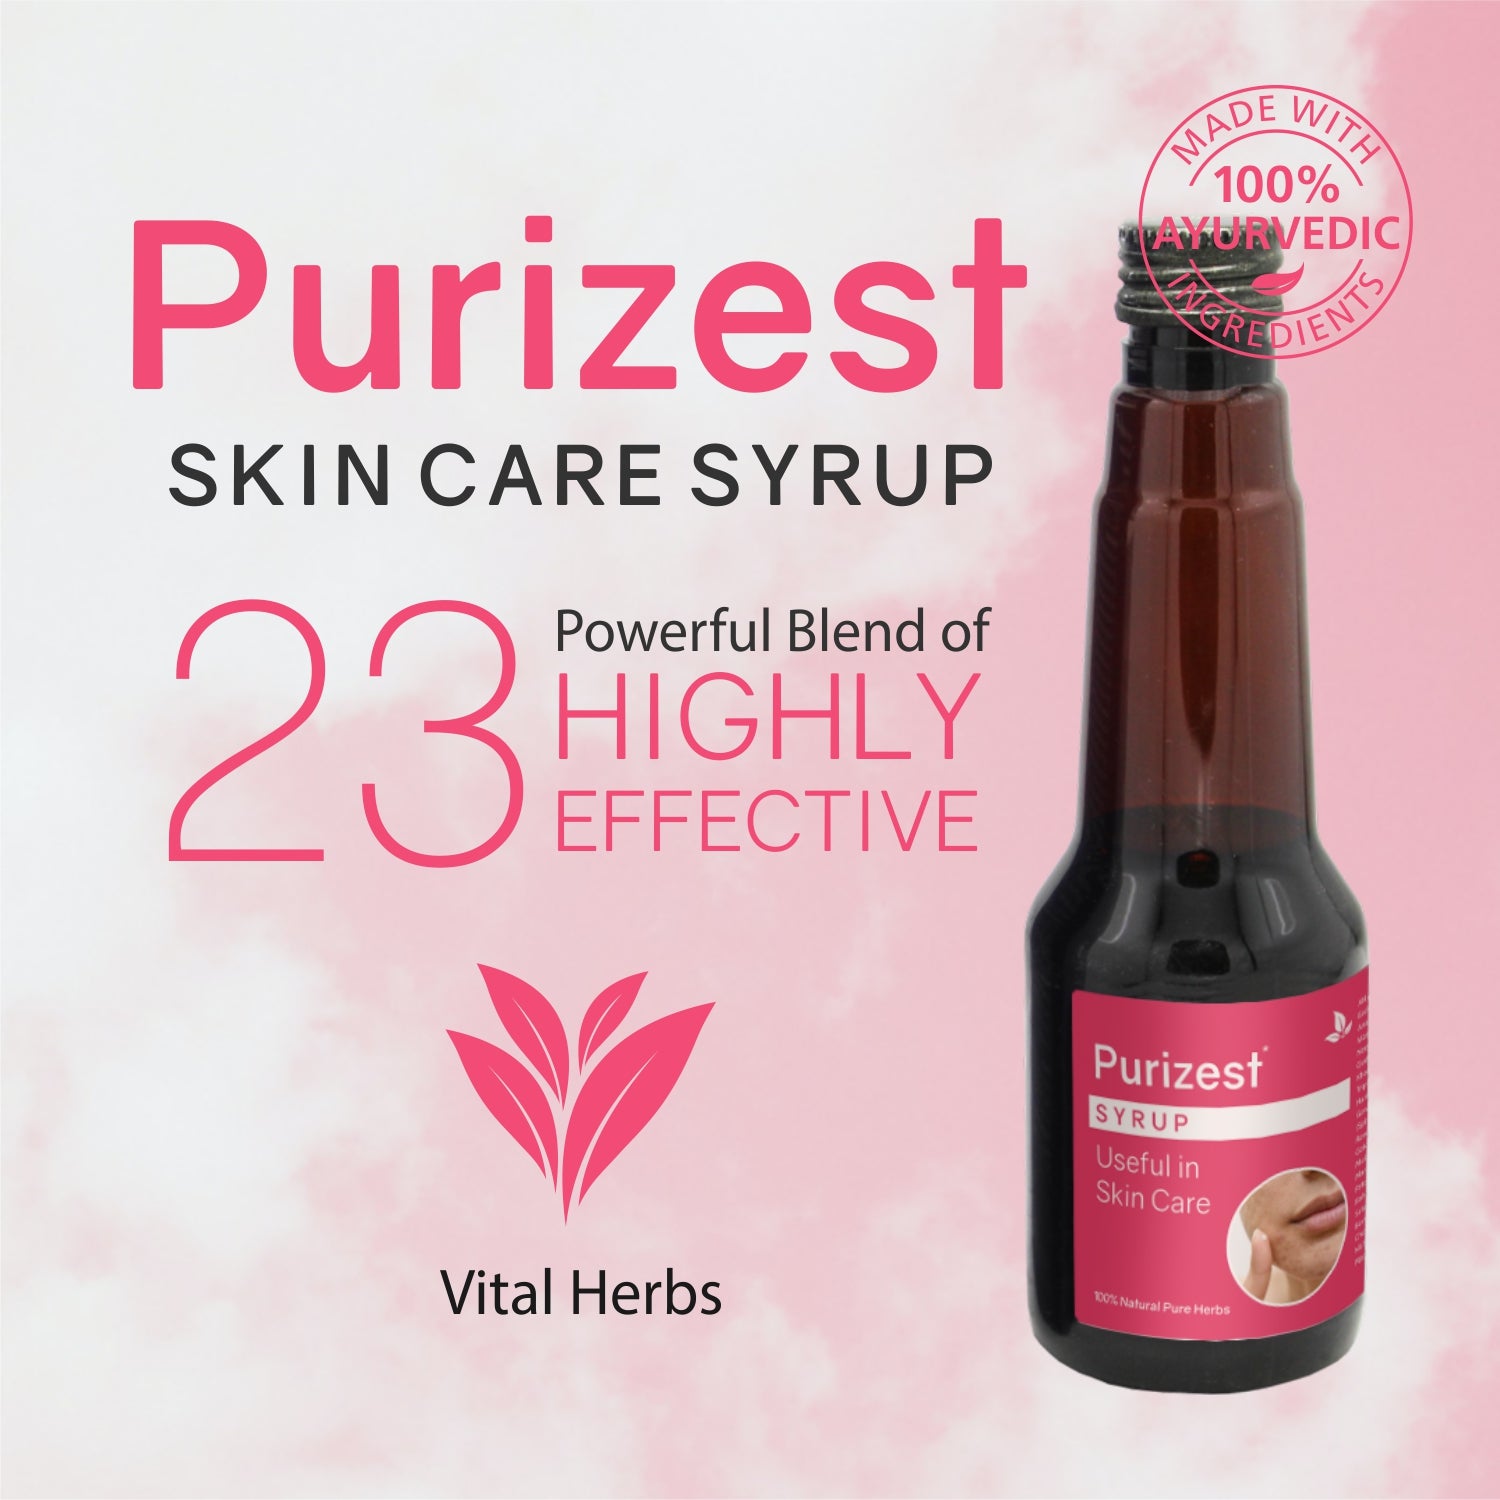 Purizest Syrup (200 ml)